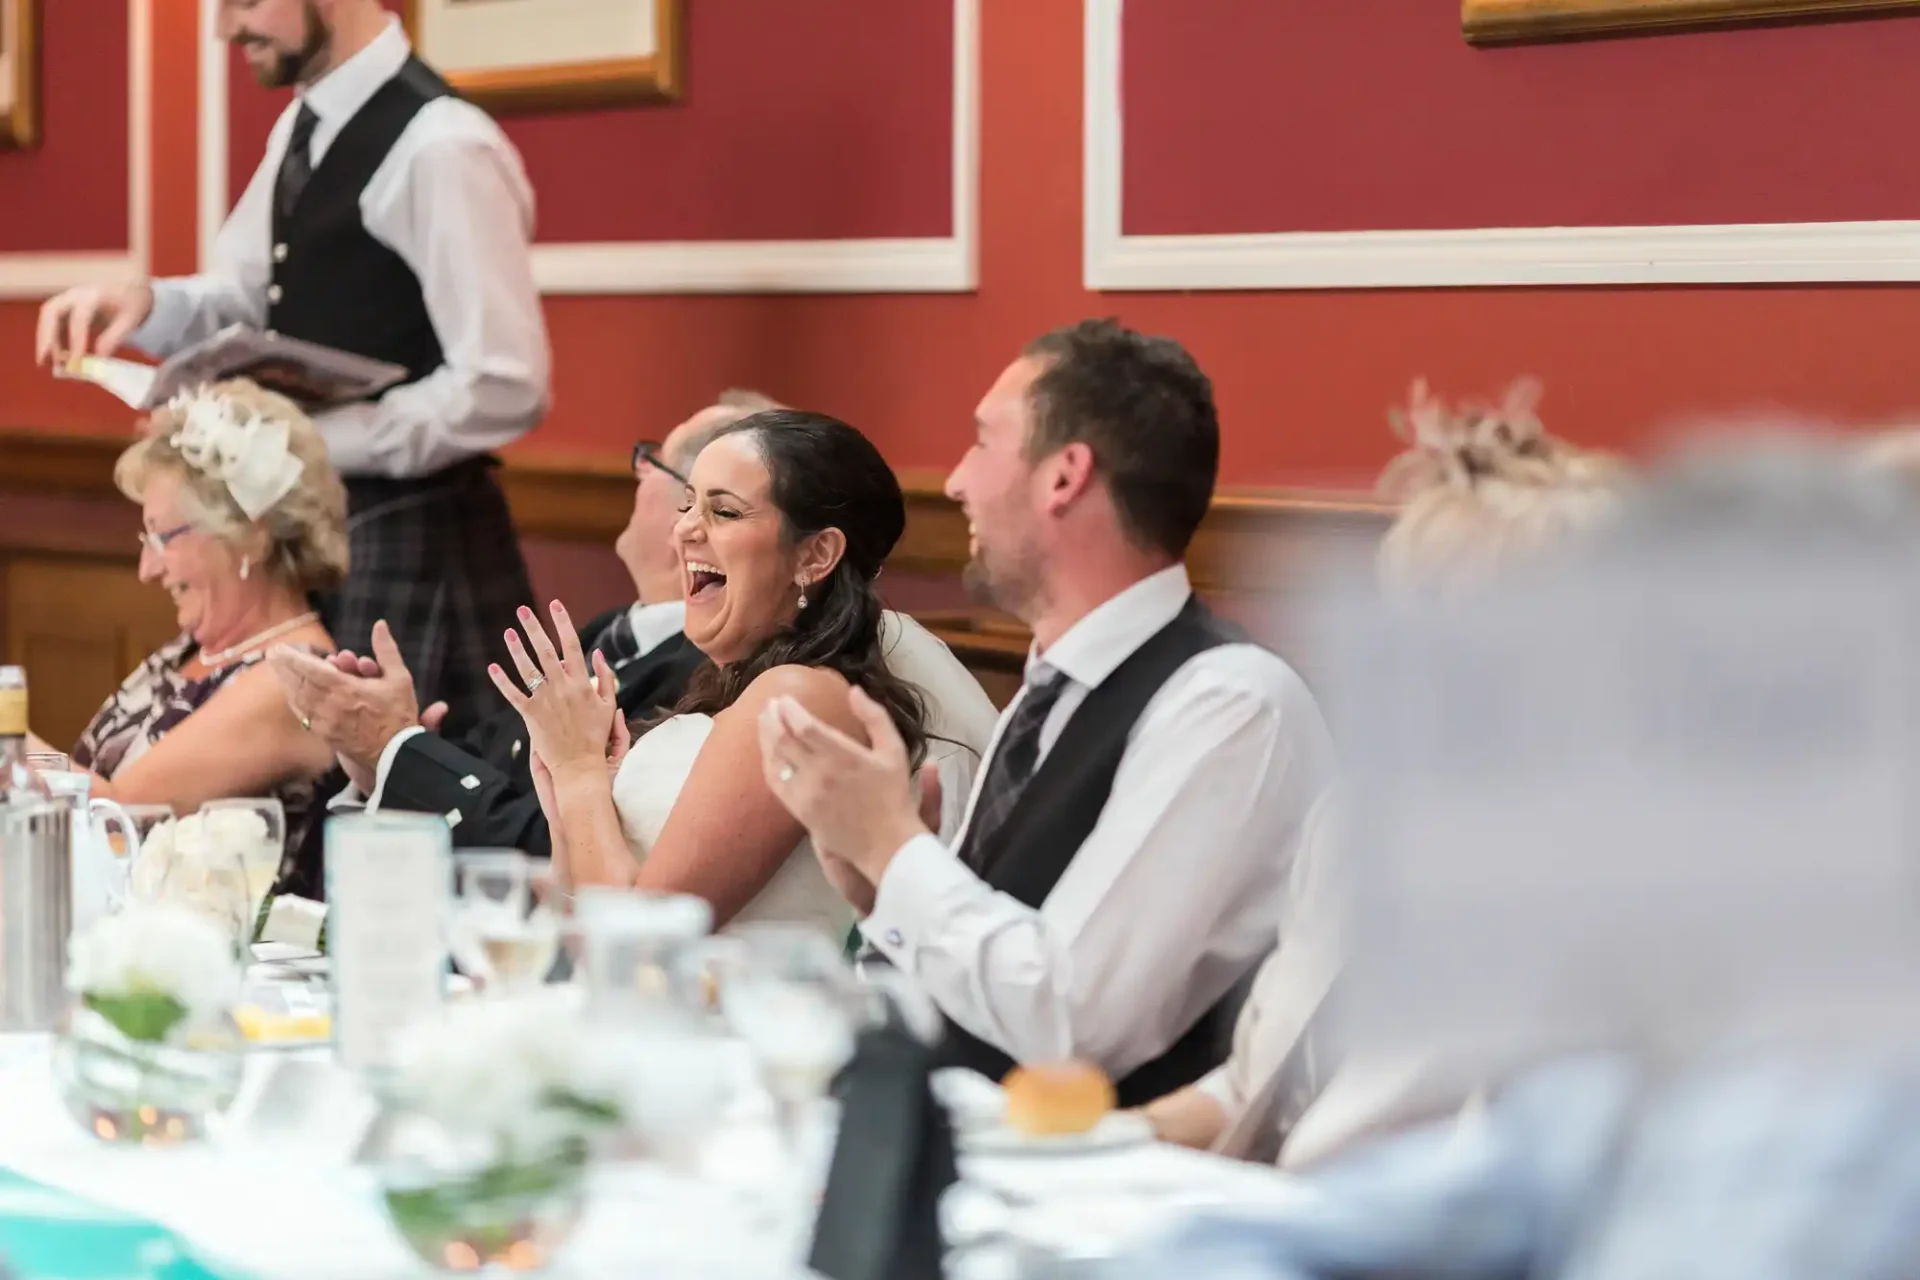 A bride and groom laughing joyfully at a wedding reception table, with guests around them and a waiter in the background.